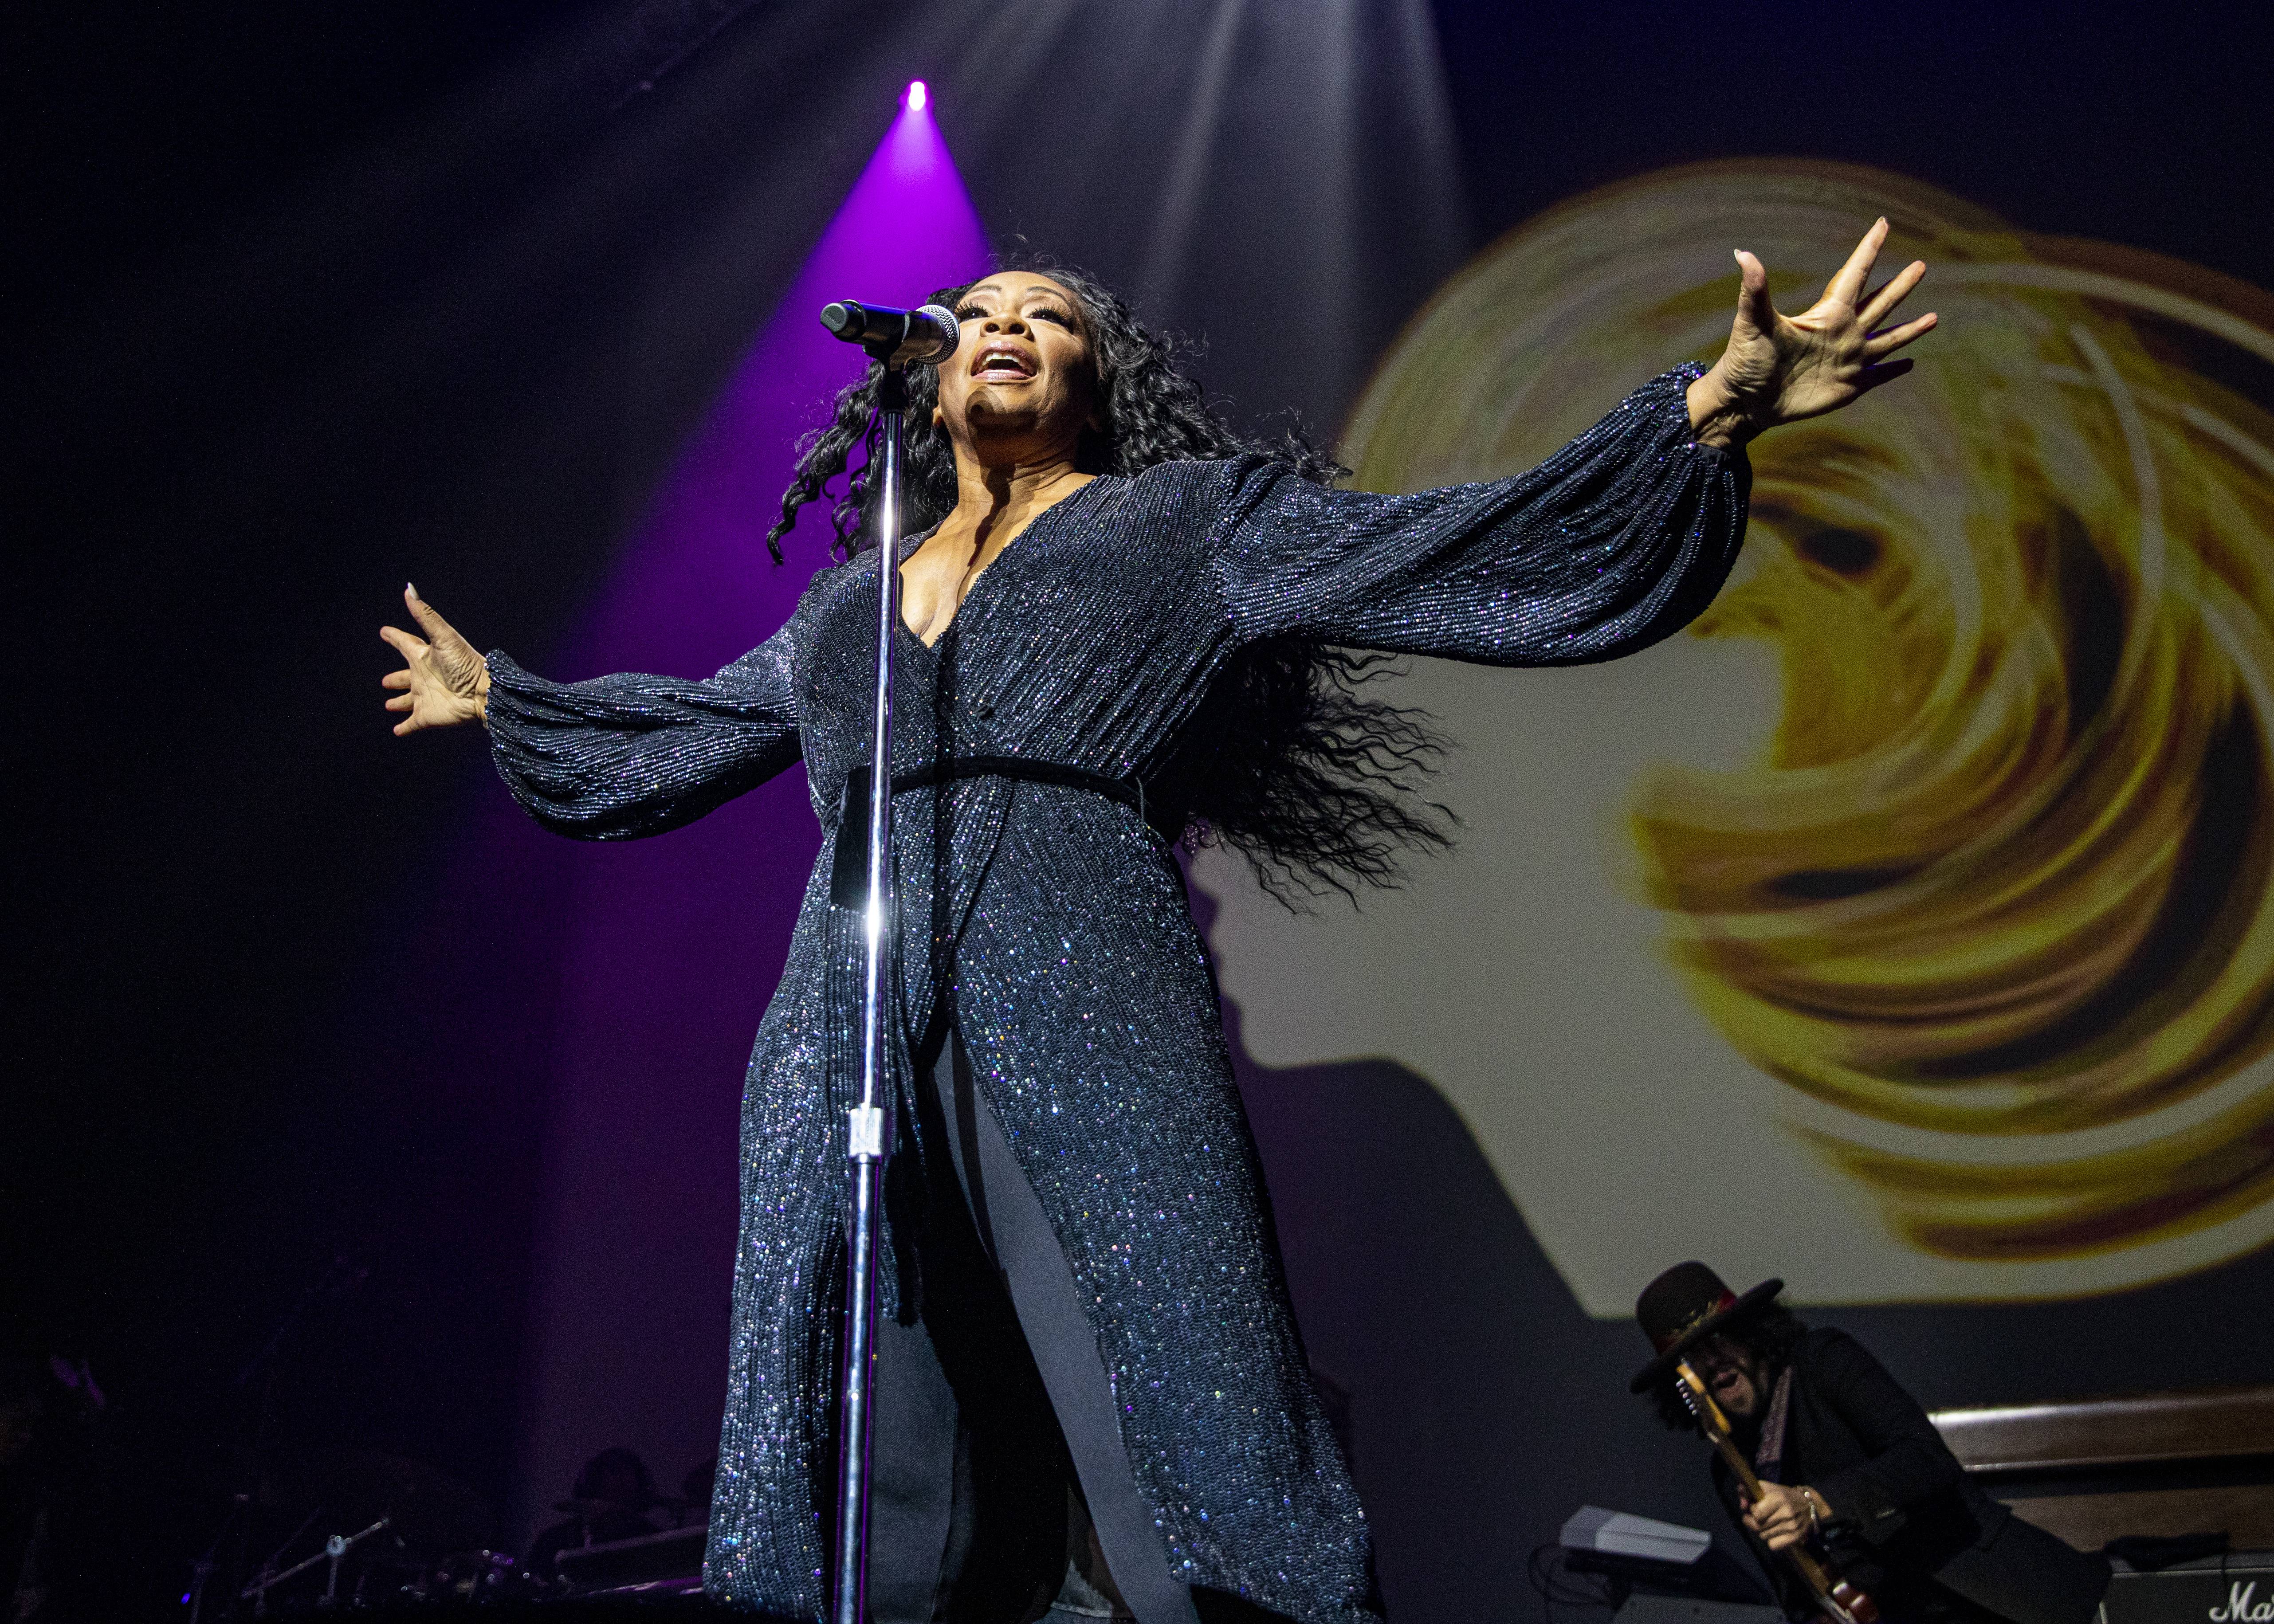 DETROIT, MICHIGAN - OCTOBER 13: Jody Watley performs at The Soundboard, Motor City Casino on October 13, 2019 in Detroit, Michigan. (Photo by Scott Legato/Getty Images)